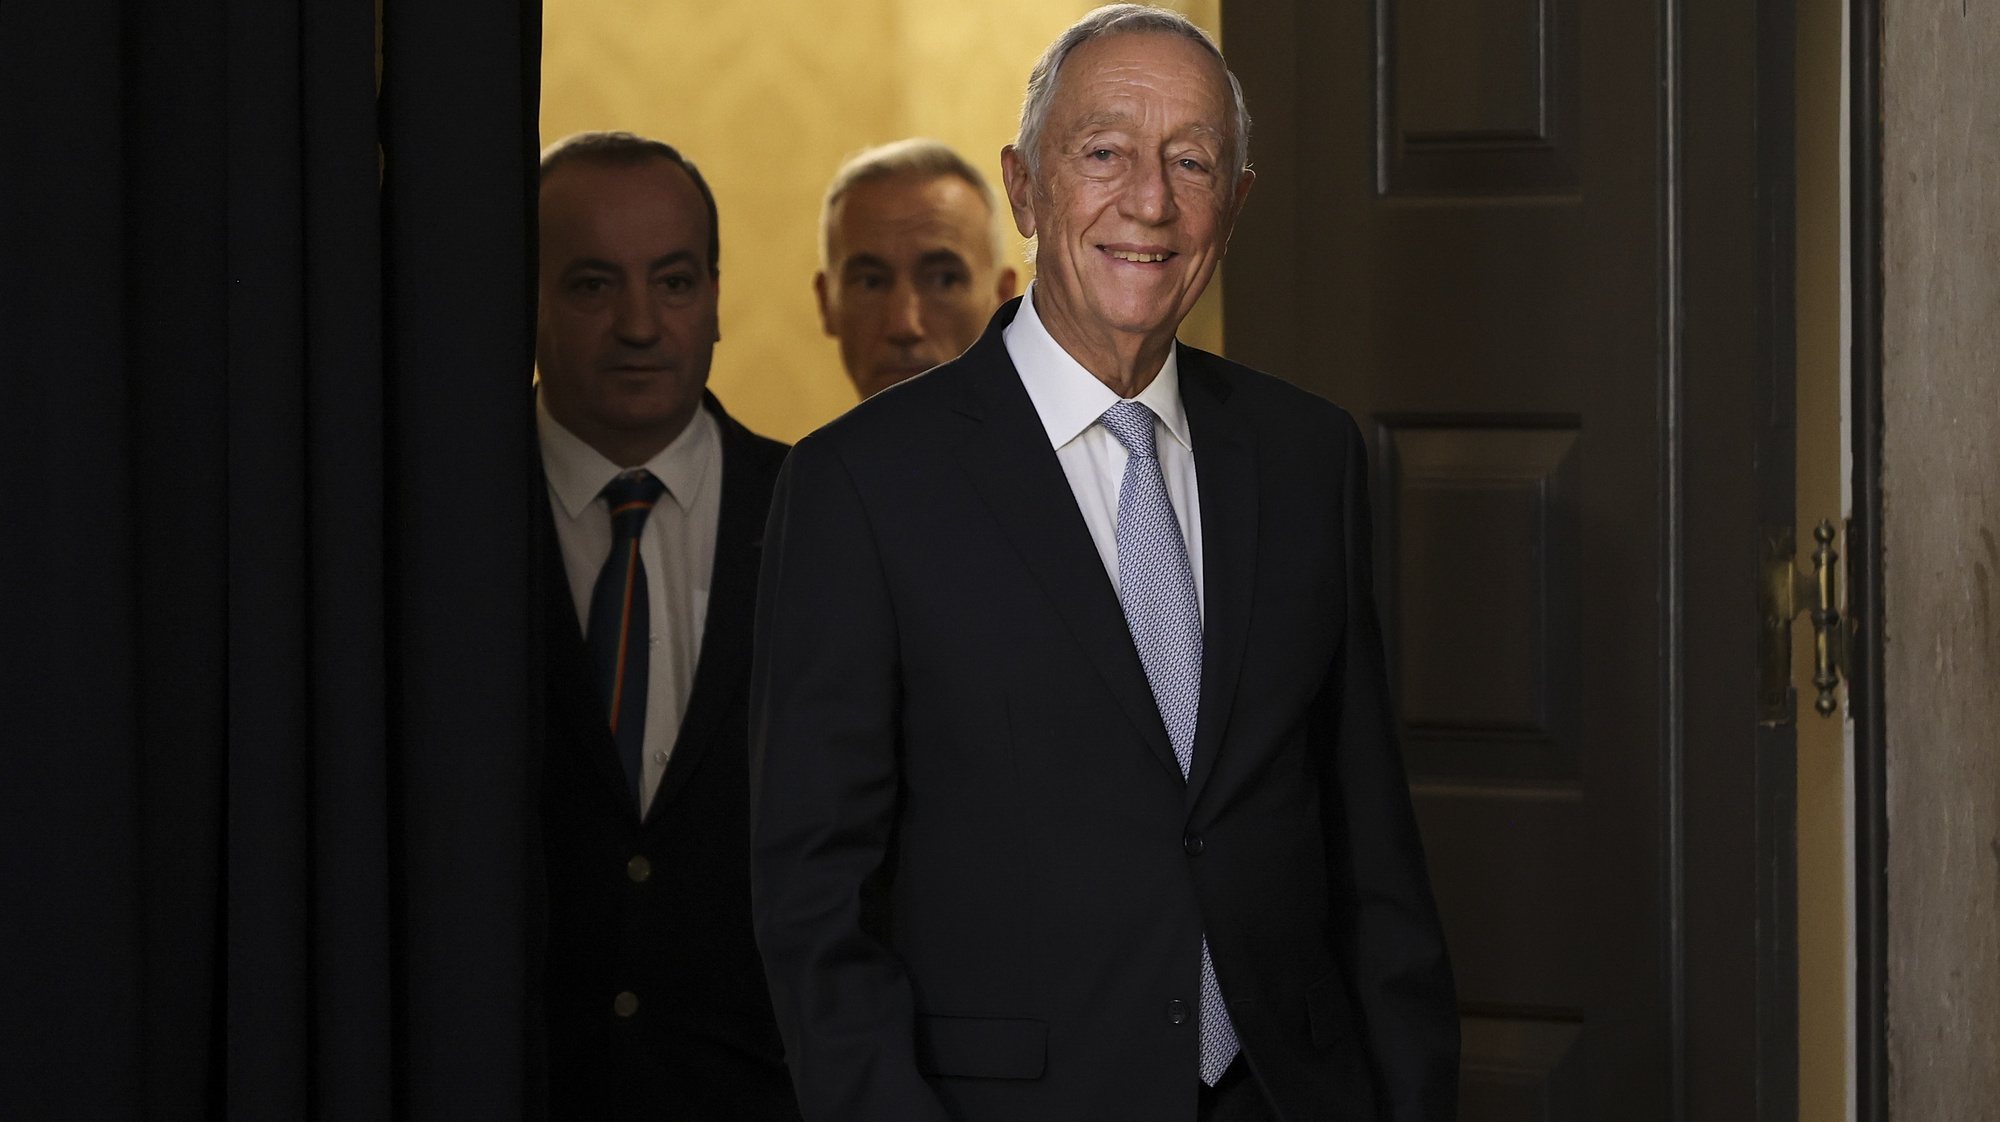 The President of the Republic, Marcelo Rebelo de Sousa, on arrival for a statement to the nation in which he decided to convoke new elections for March 2024 after a meeting of the Council of State, Belem Palace in Lisbon, Portugal, 09 November 2023. Prime Minister António Costa tendered his resignation on Tuesday, which the head of state accepted, after several government offices were raided as part of investigations into lithium and hydrogen projects and the Public Prosecutor&#039;s Office announced that he is the subject of an autonomous enquiry at the Supreme Court of Justice. CARLOS M. ALMEIDA/LUSA